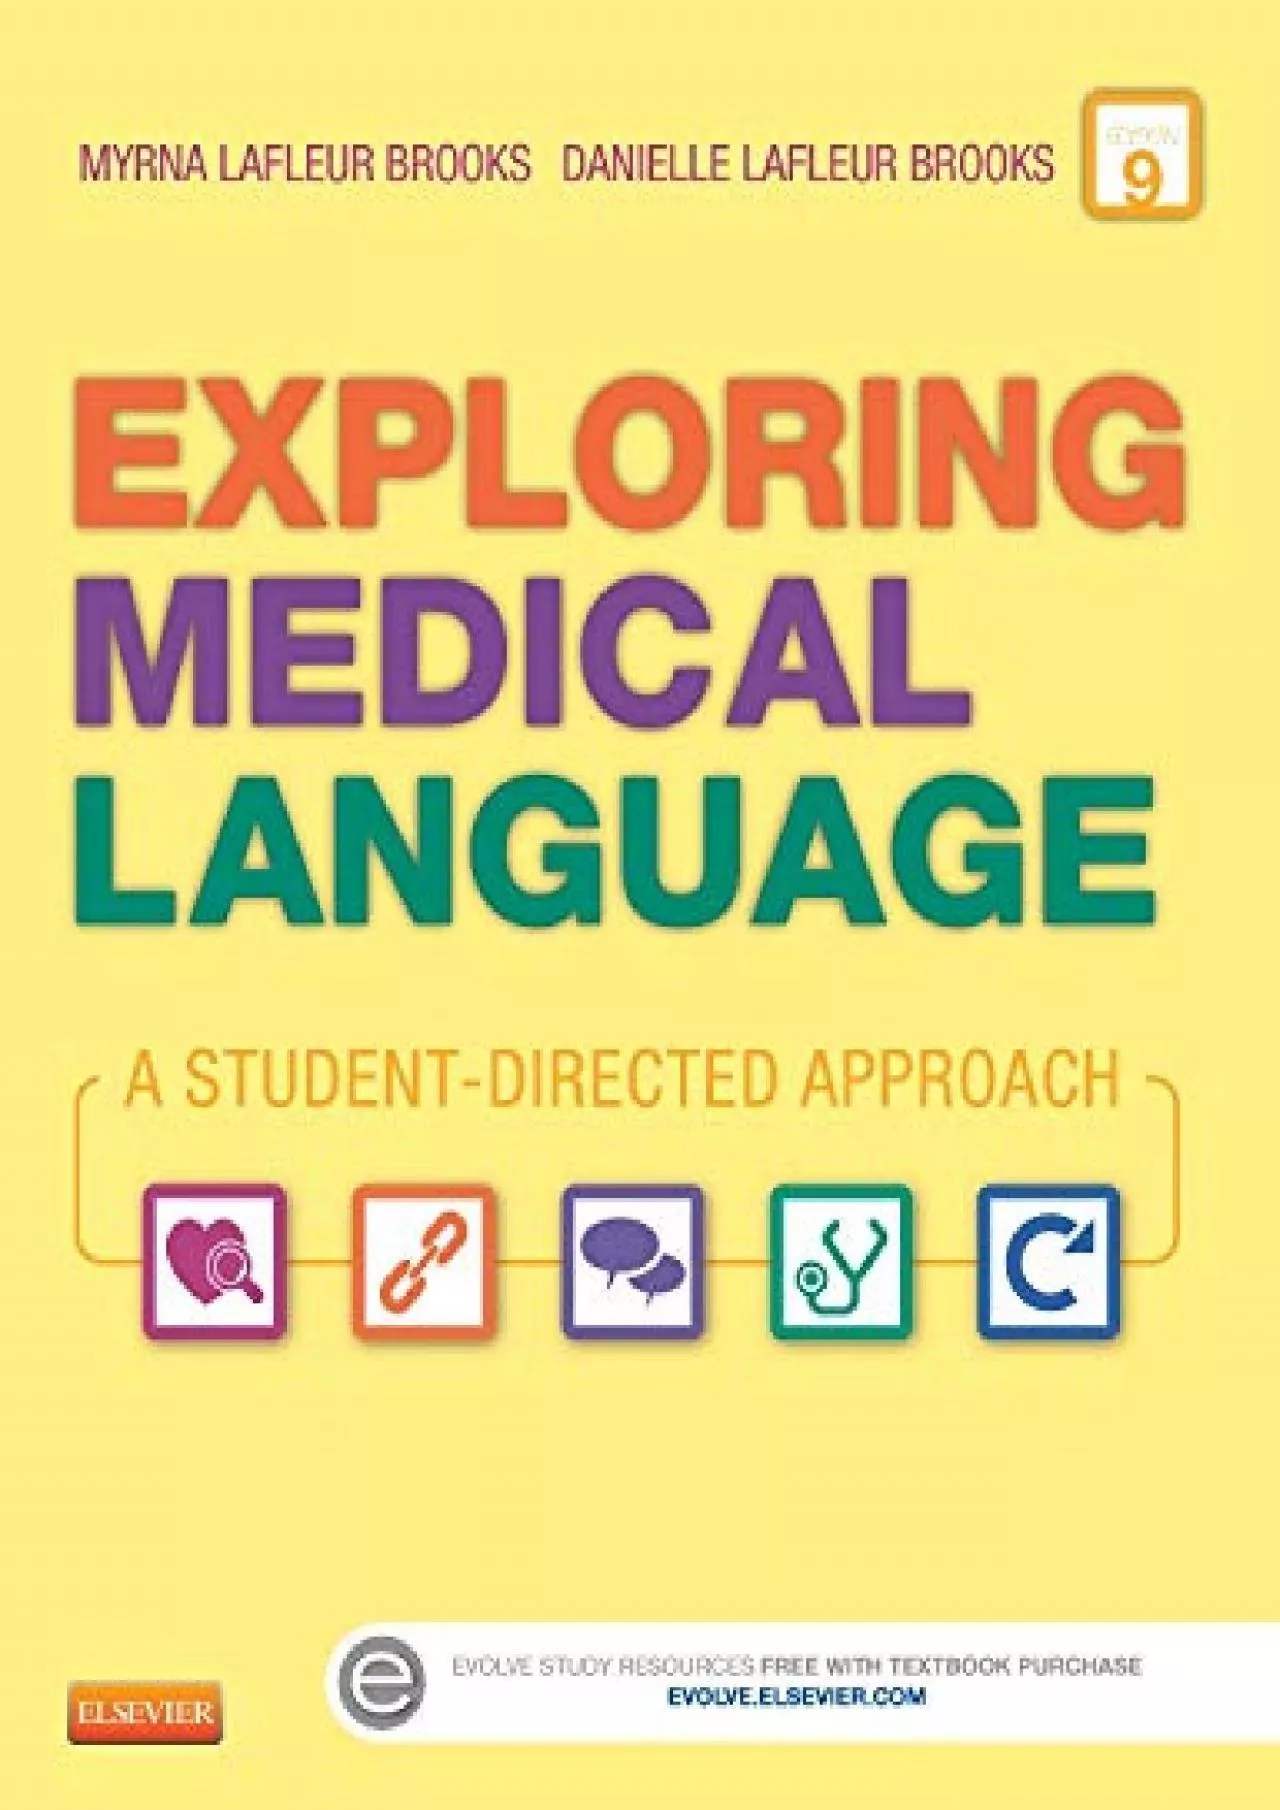 (DOWNLOAD)-Exploring Medical Language: A Student-Directed Approach